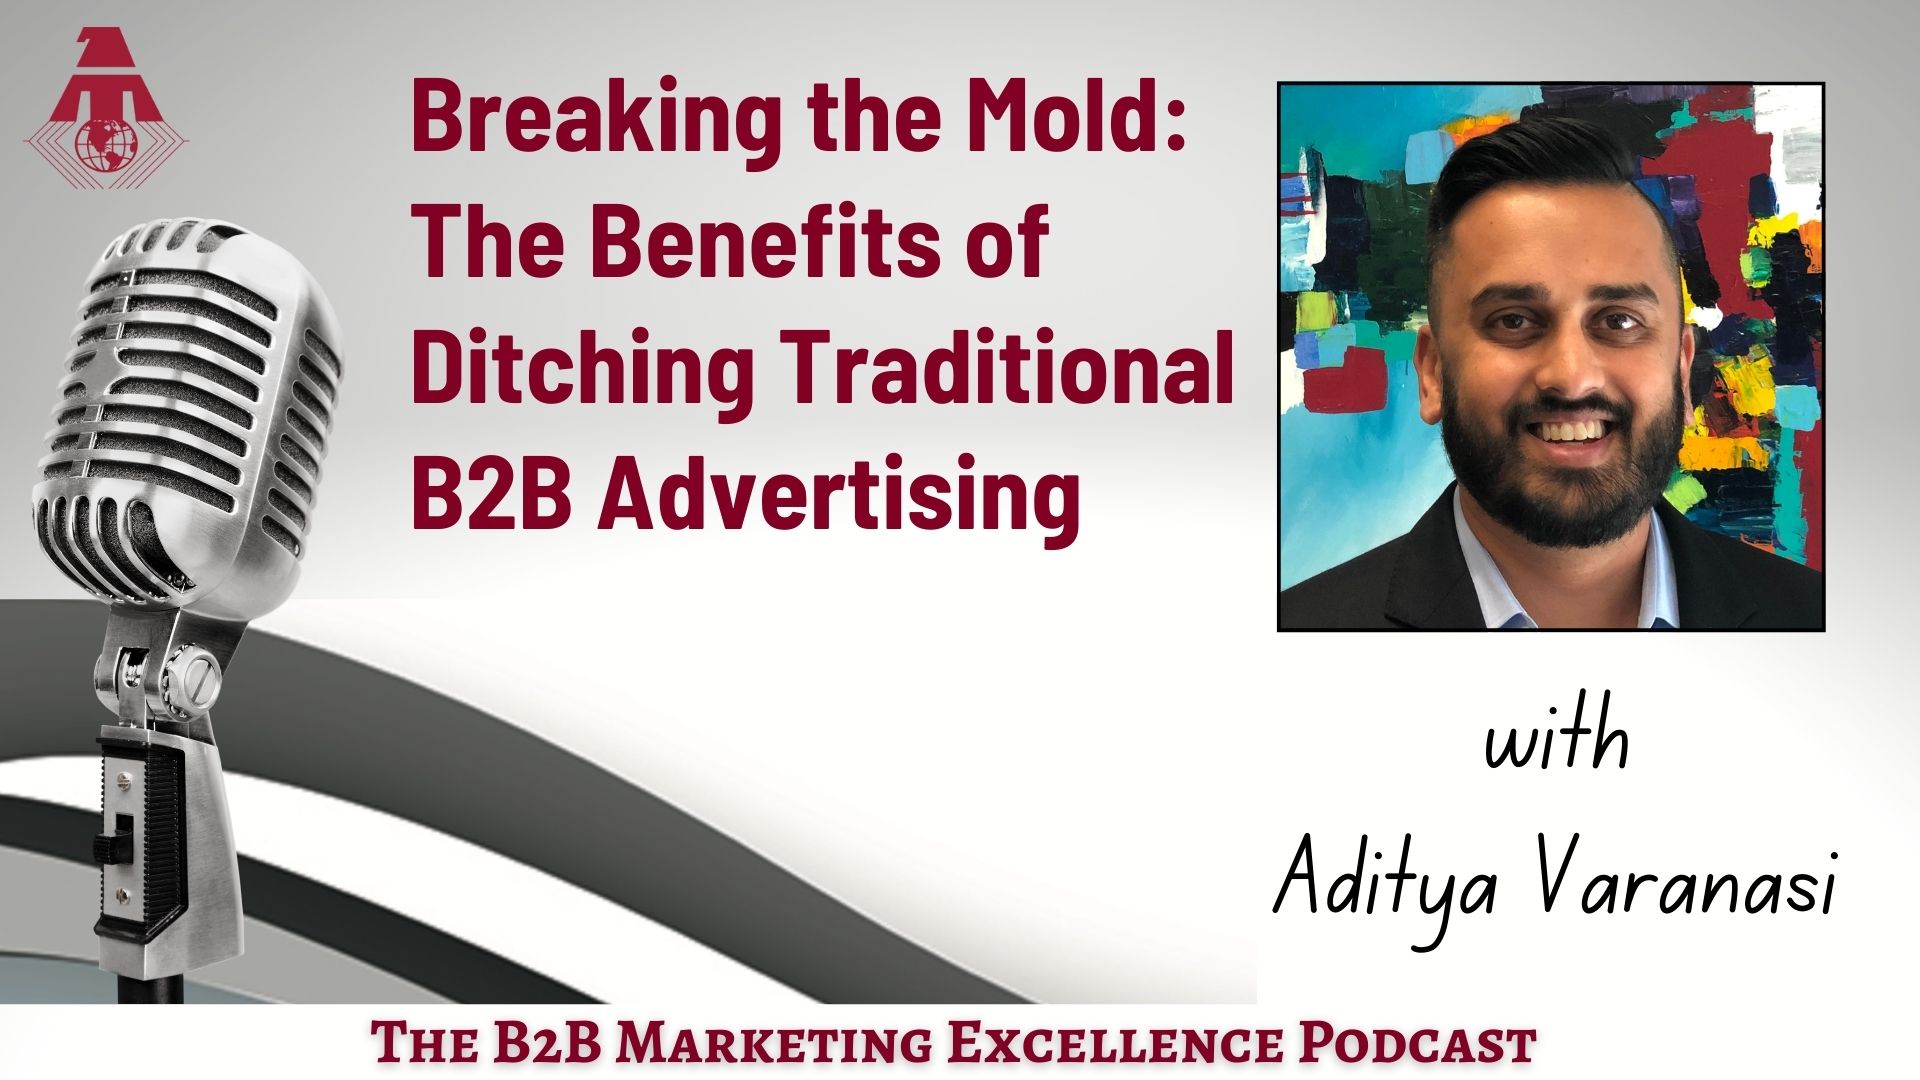 Podcast – Breaking the Mold: The Benefits of Ditching Traditional B2B Advertising